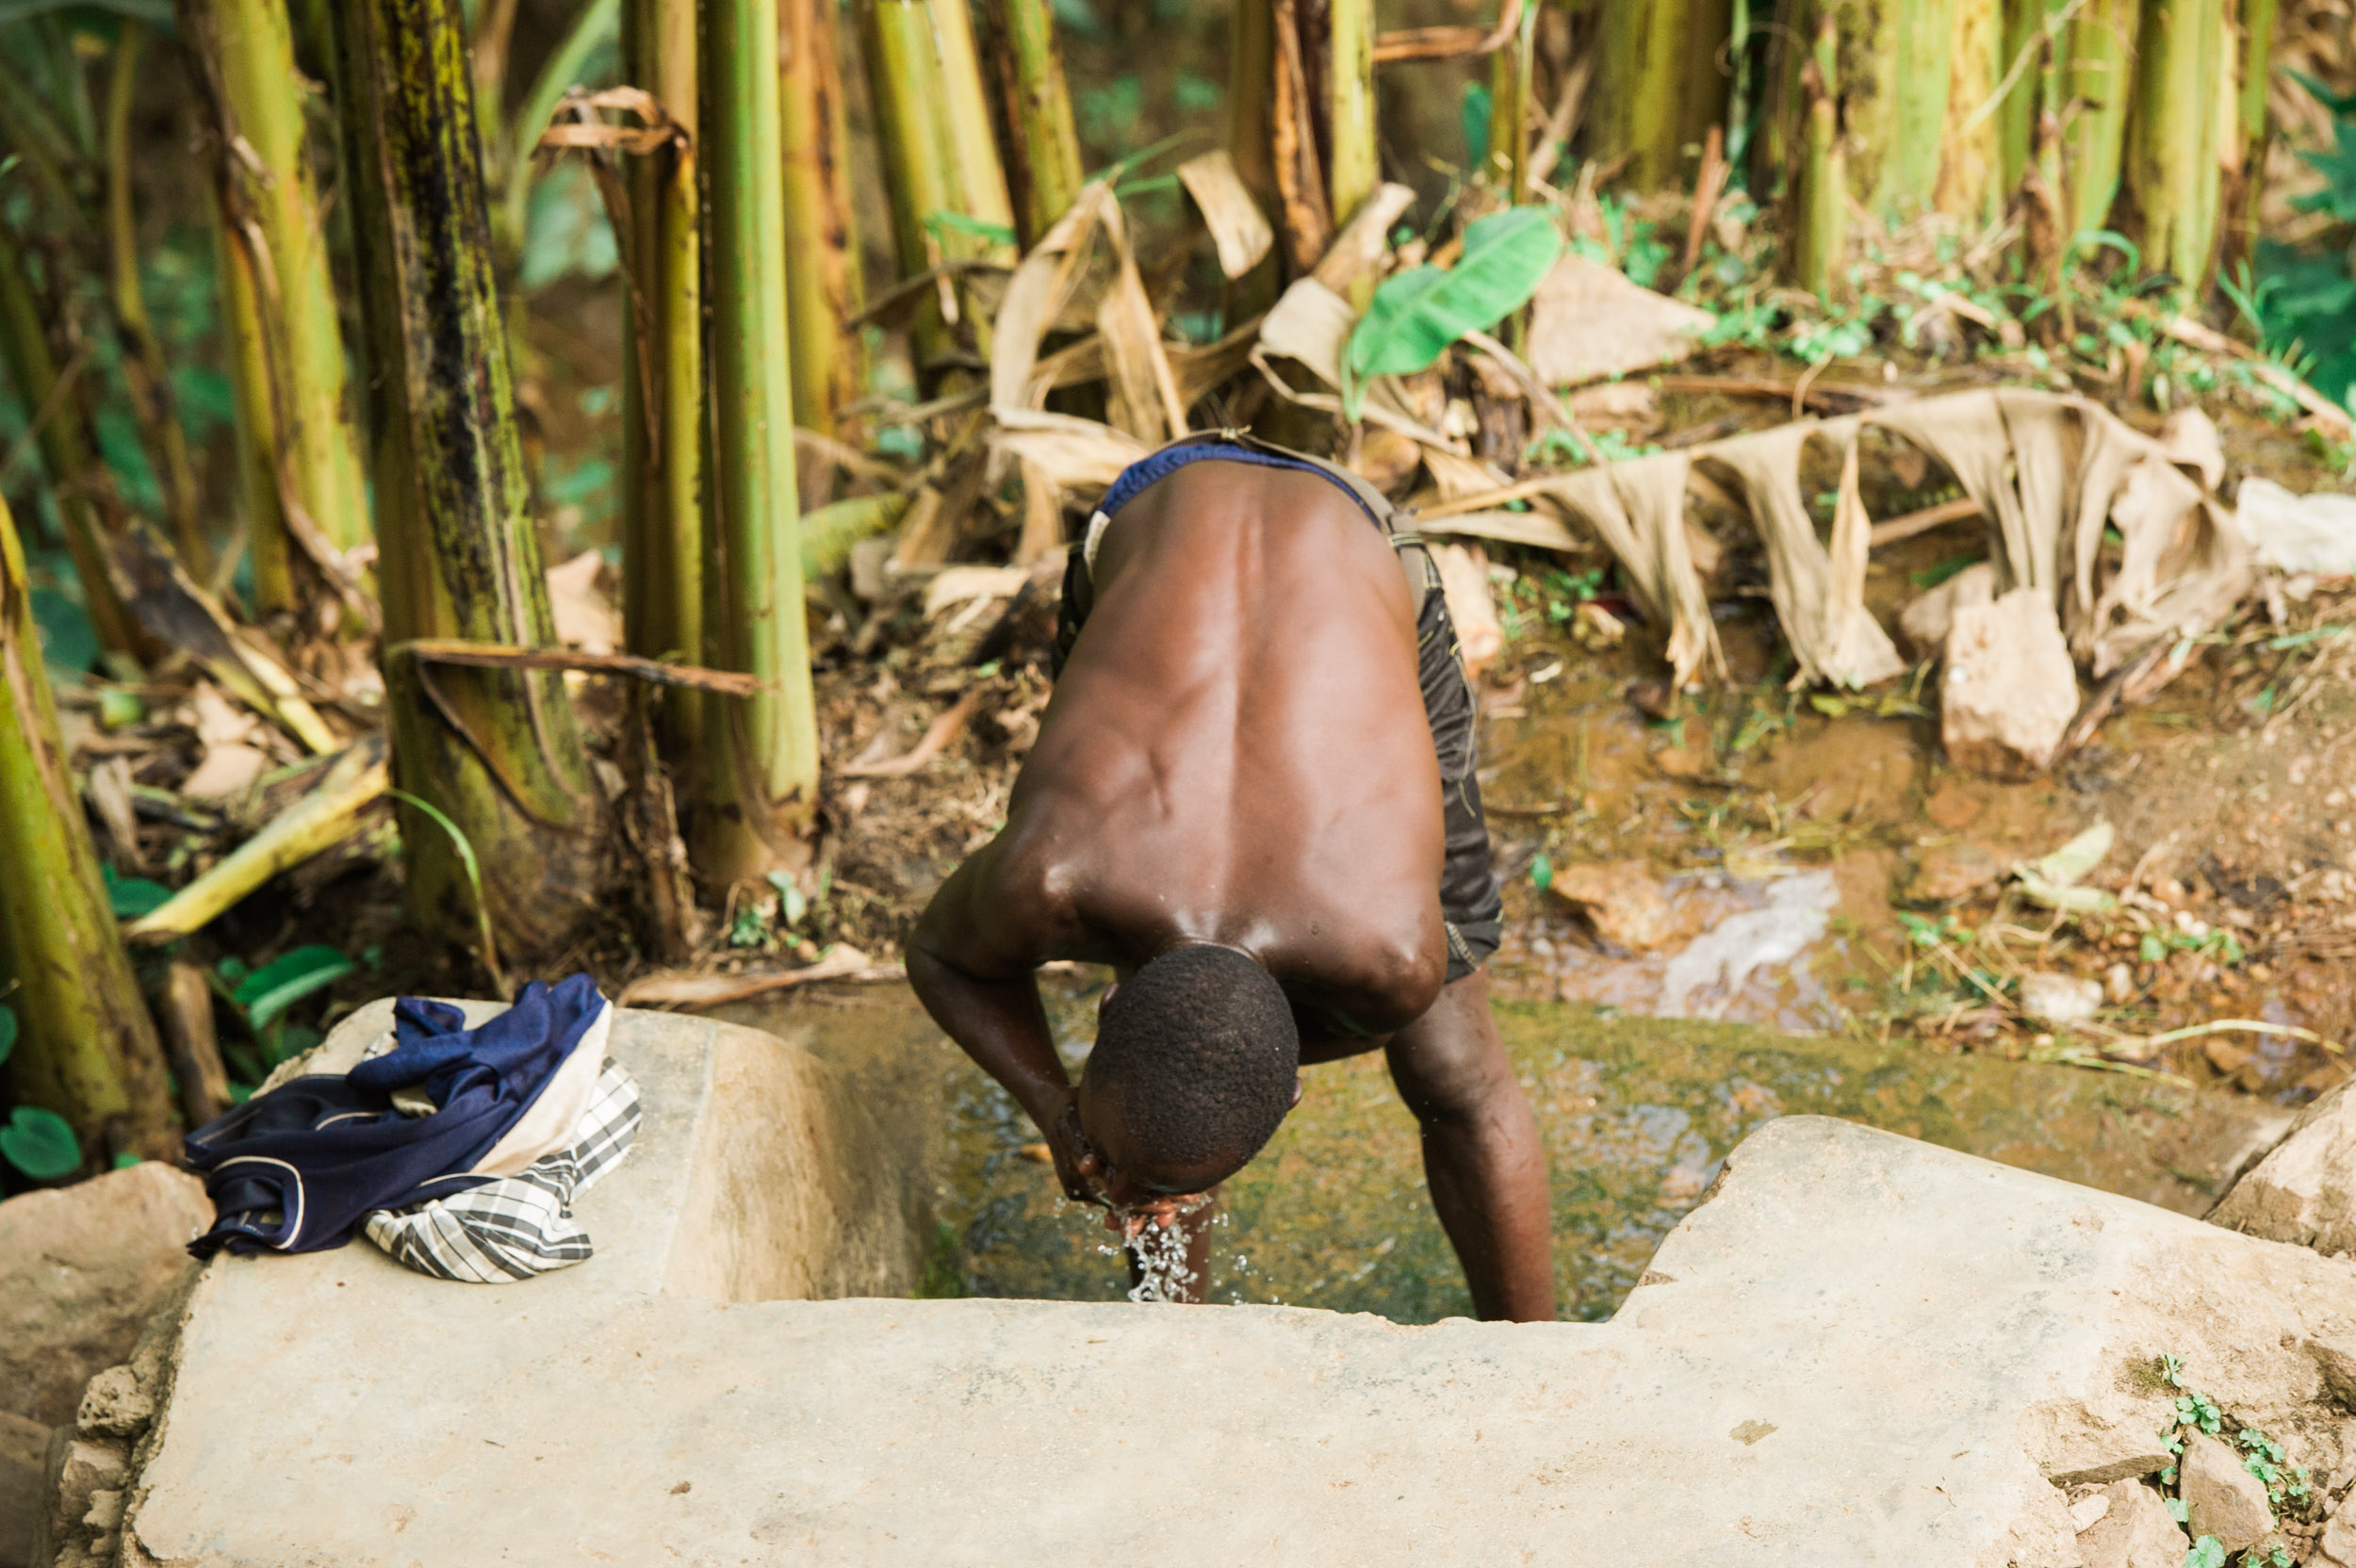  A man drinks from a well near the banks of Nyabarongo River, among a grove of banana trees. 